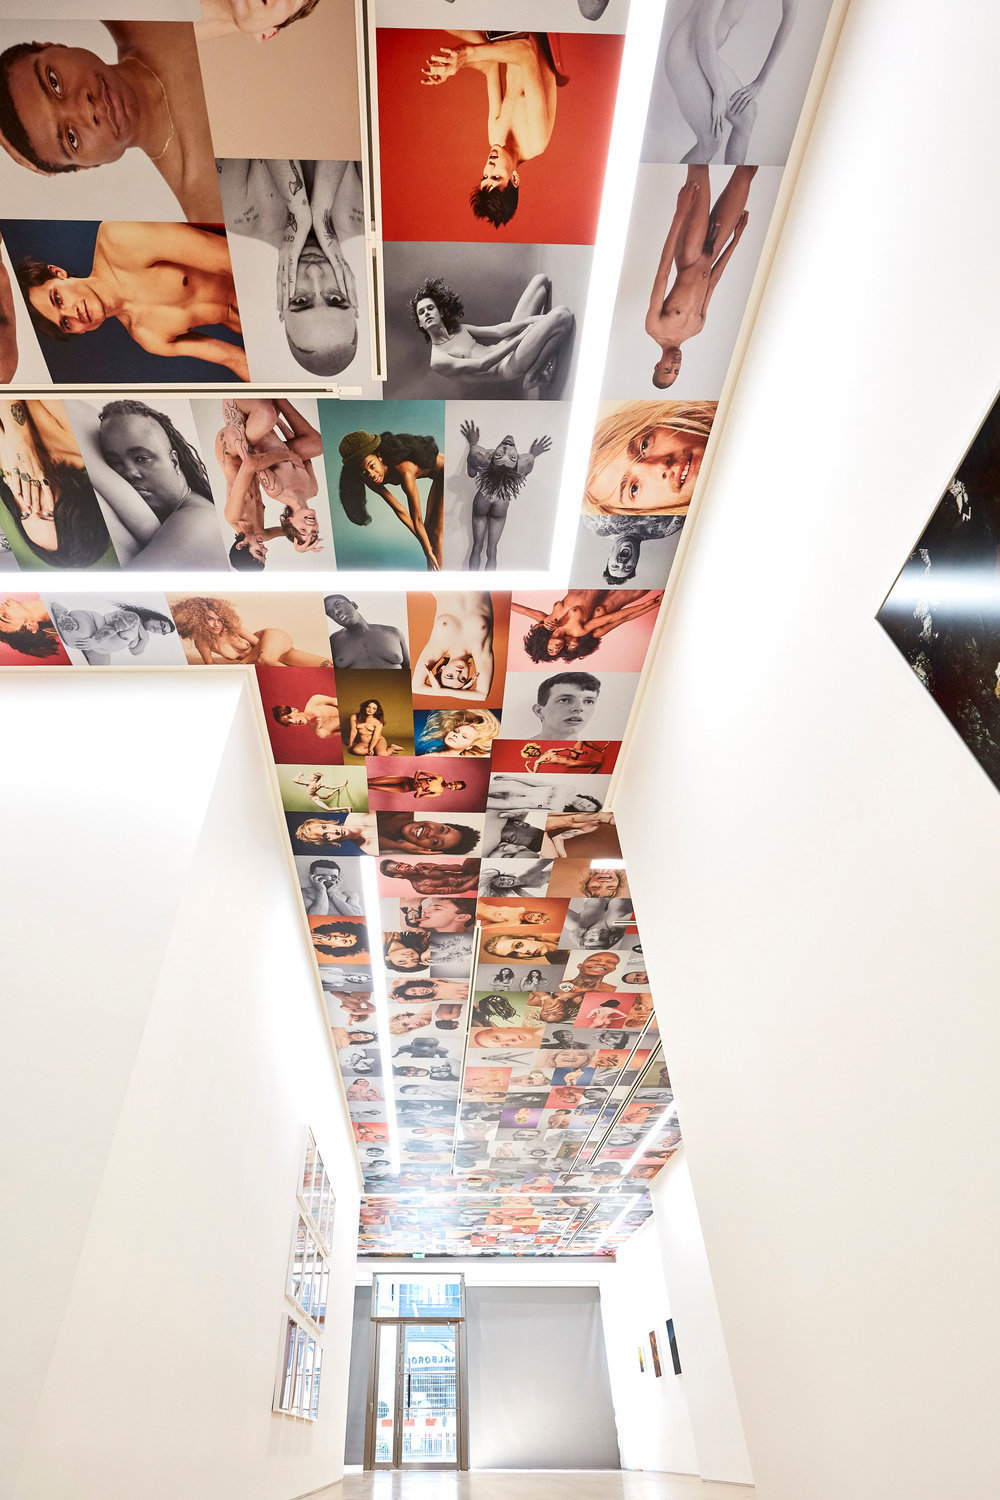 An installation view of Ryan McGinley photographs on the gallery walls and ceiling. 